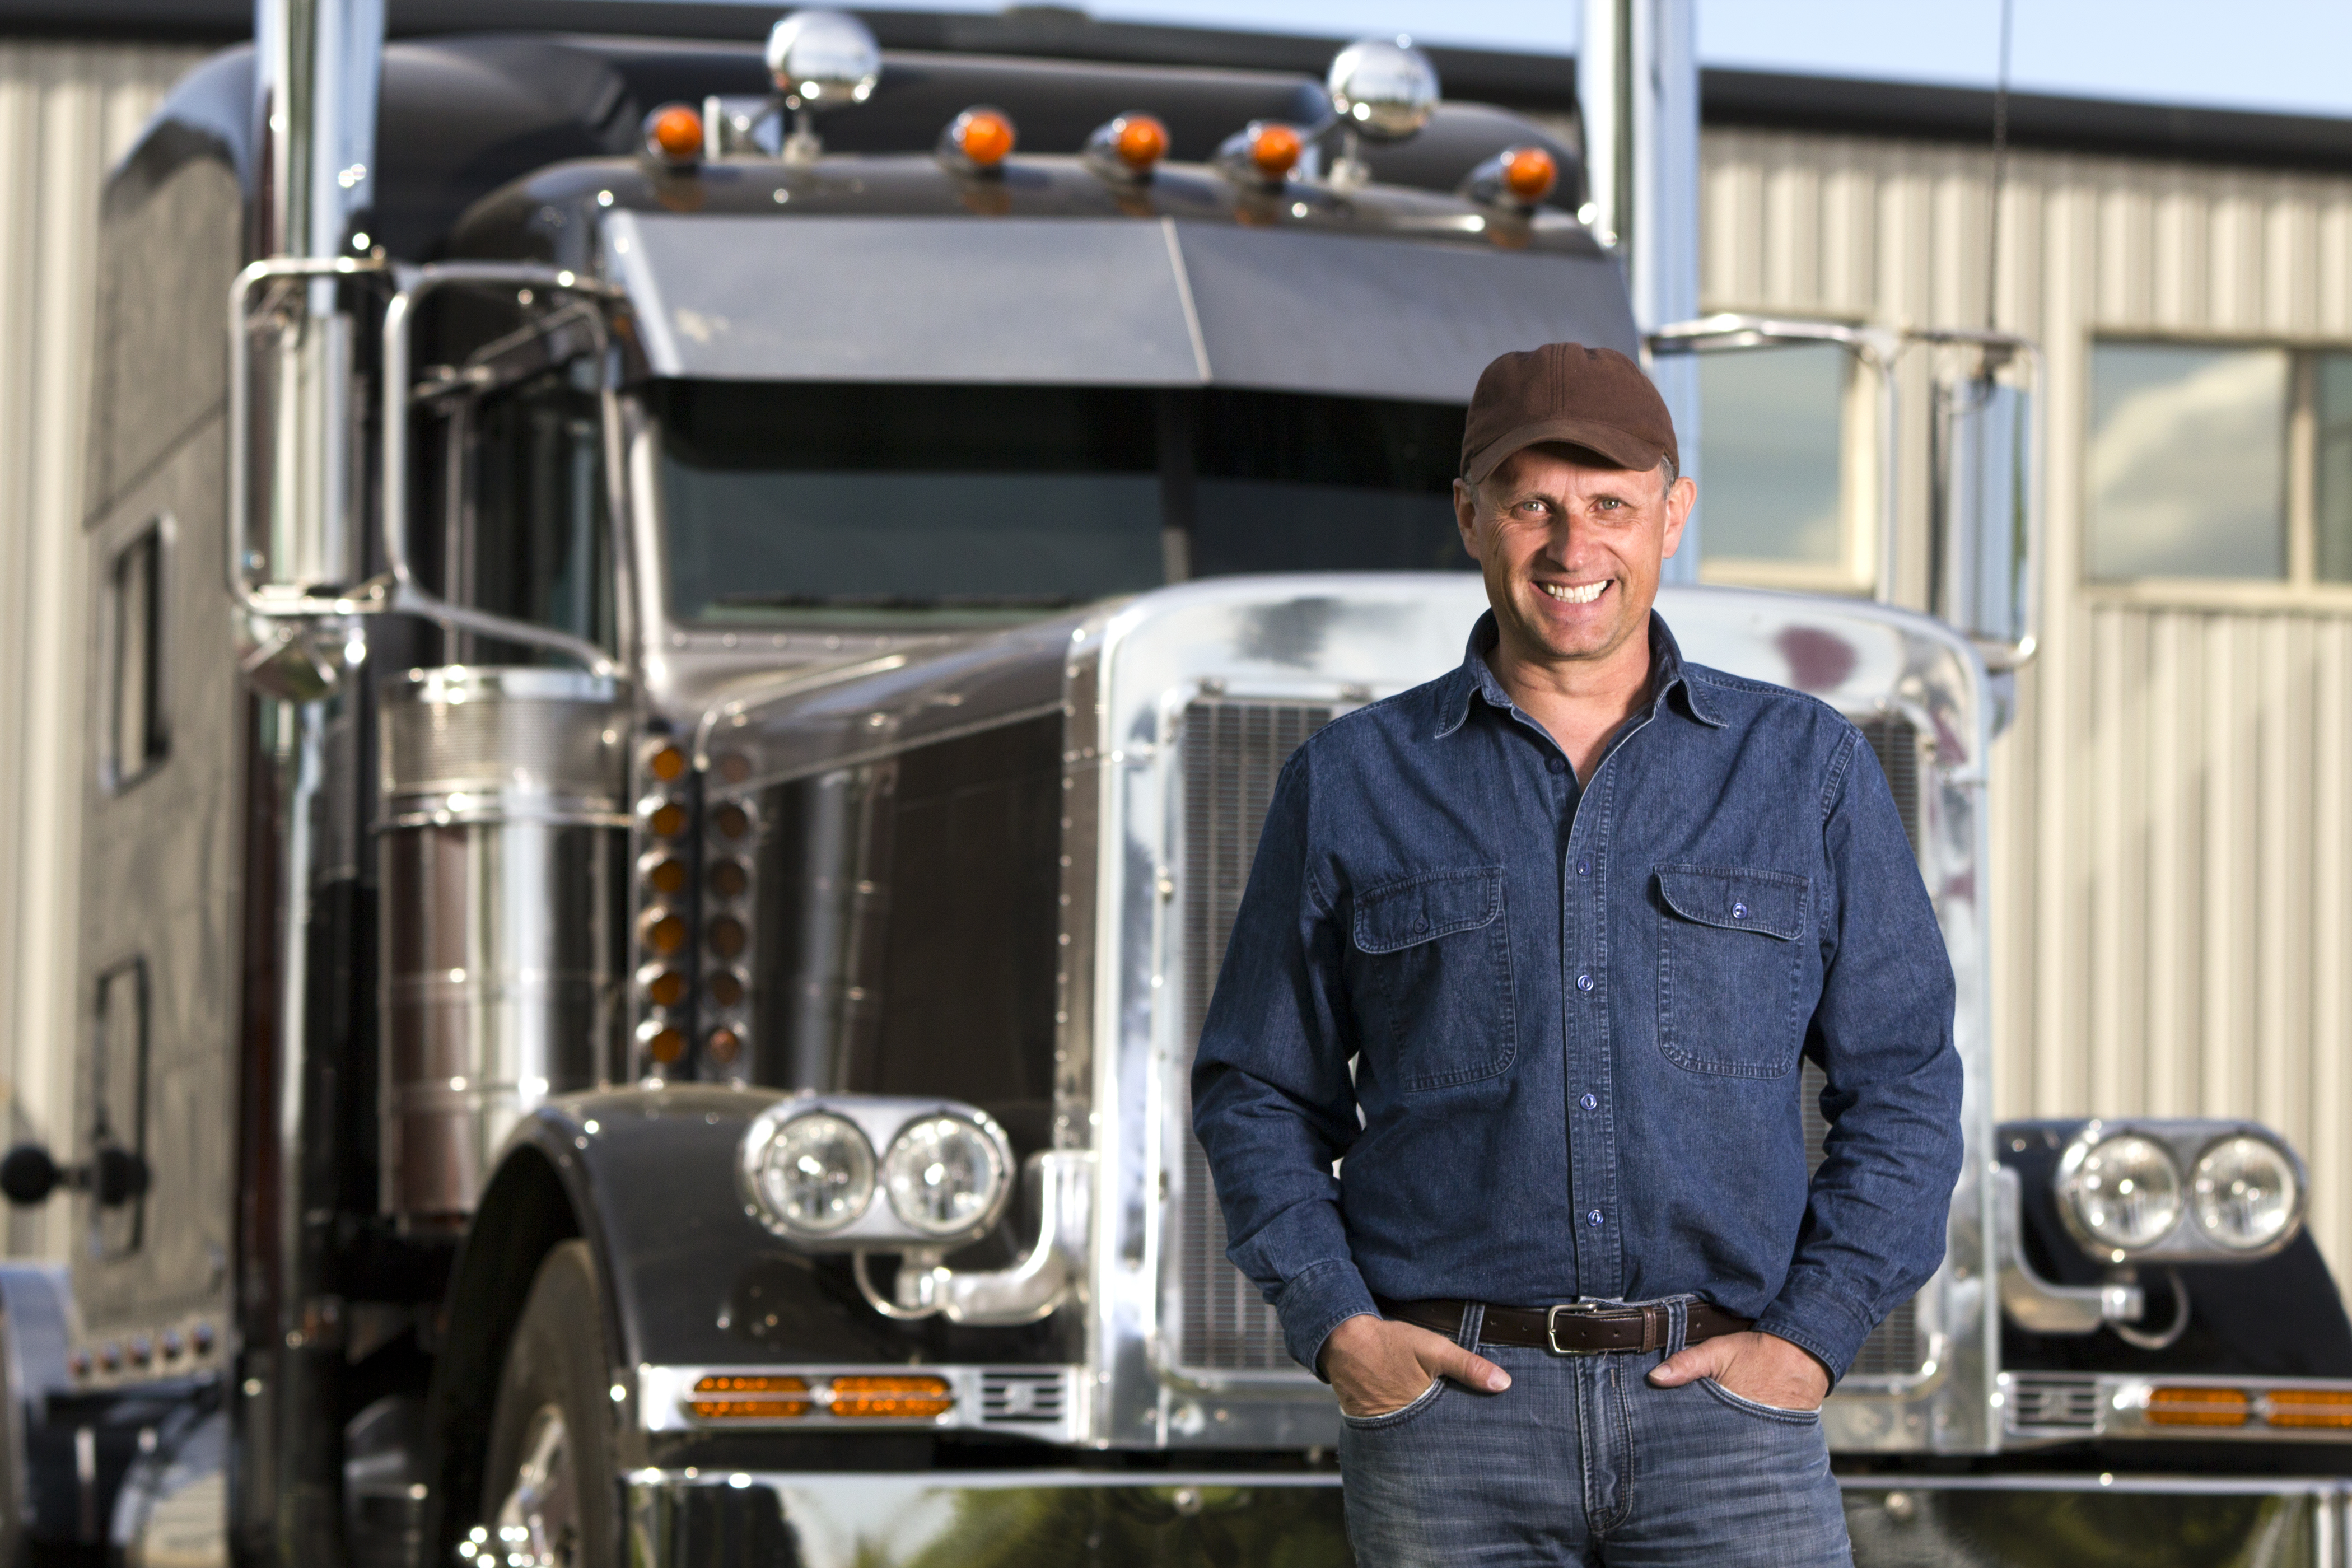 An image from the transportation industry of a truck driver in front of his truck at a distribution warehouse.